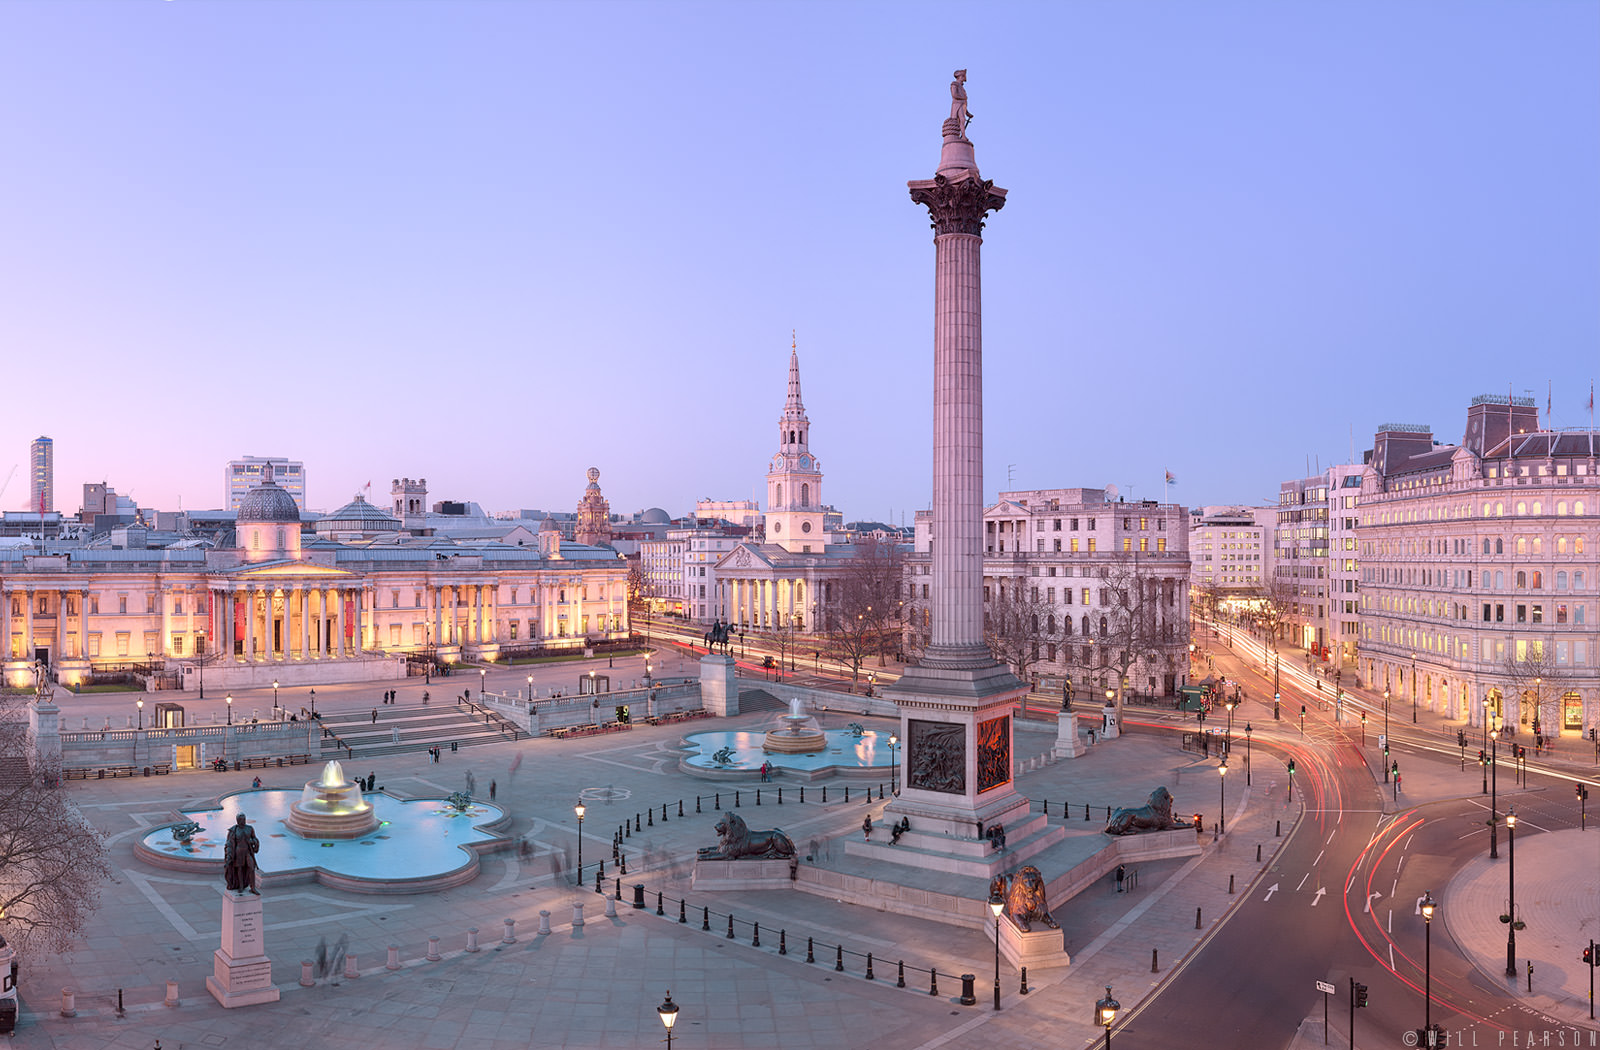 Plan a Trip to London If You Want to Know When You’ll Meet Your Soulmate ❤️ Trafalgar Square, London